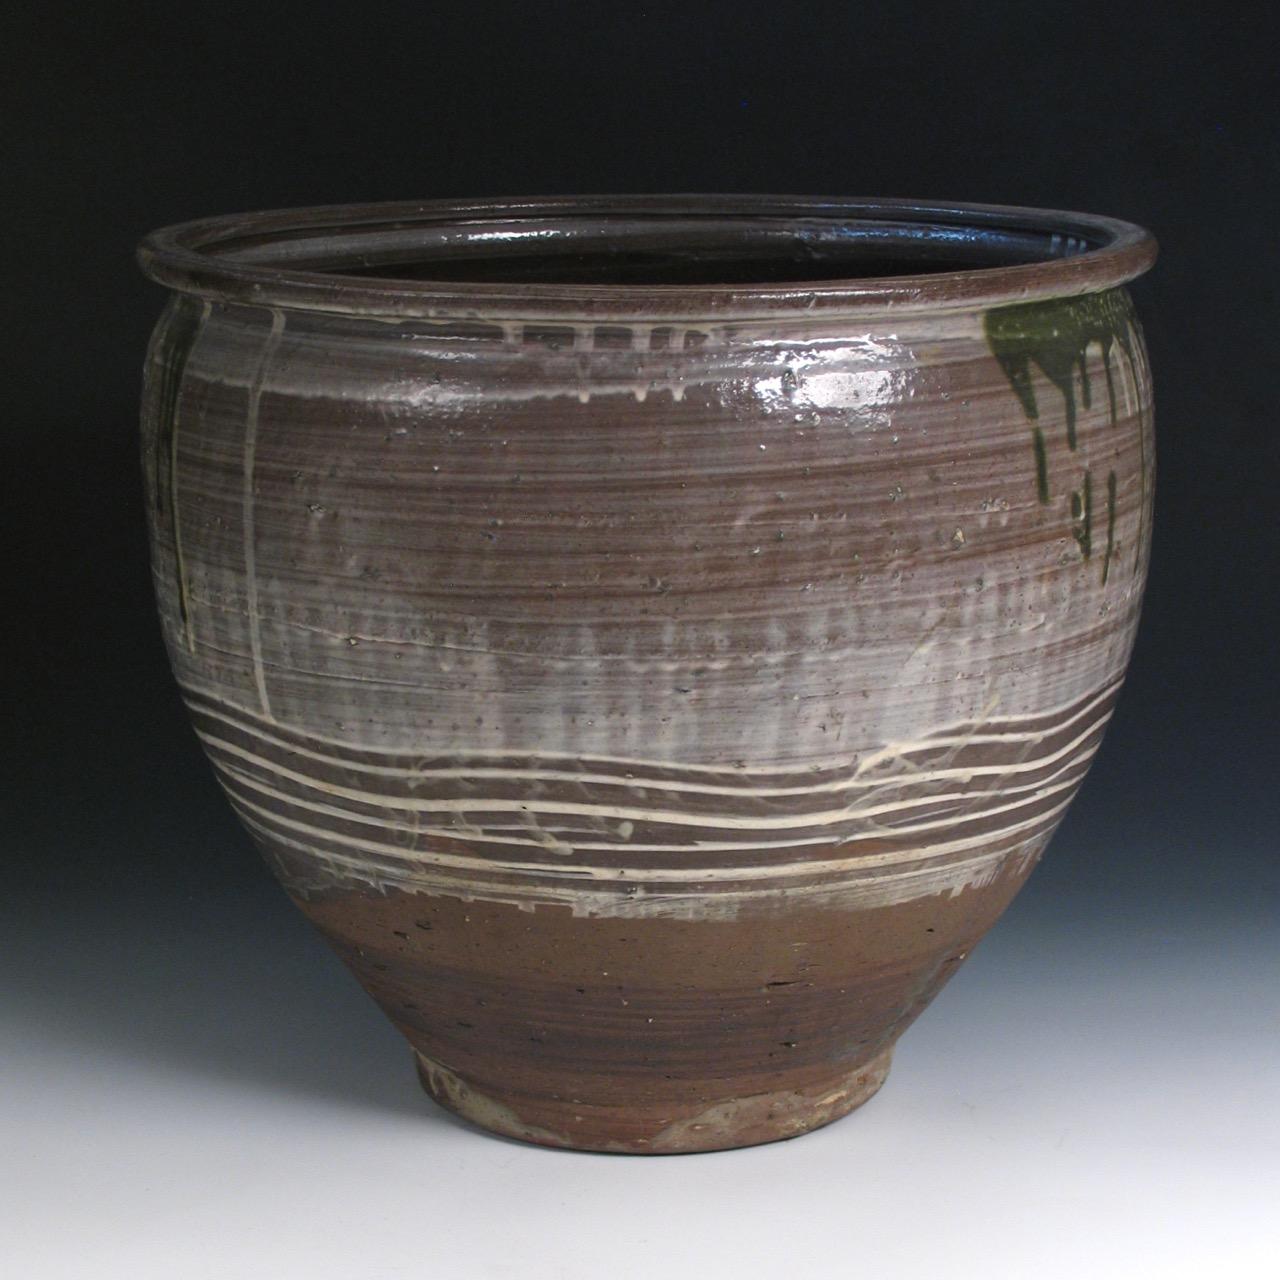 Japanese Yumino Wax Bean Storage Jar, northern Kyushu, Yumino kiln, well shaped and thickly potted stoneware jar, large well-rounded body with everted lip, lightly applied white slip with dripping copper-oxide green glaze with bottom section